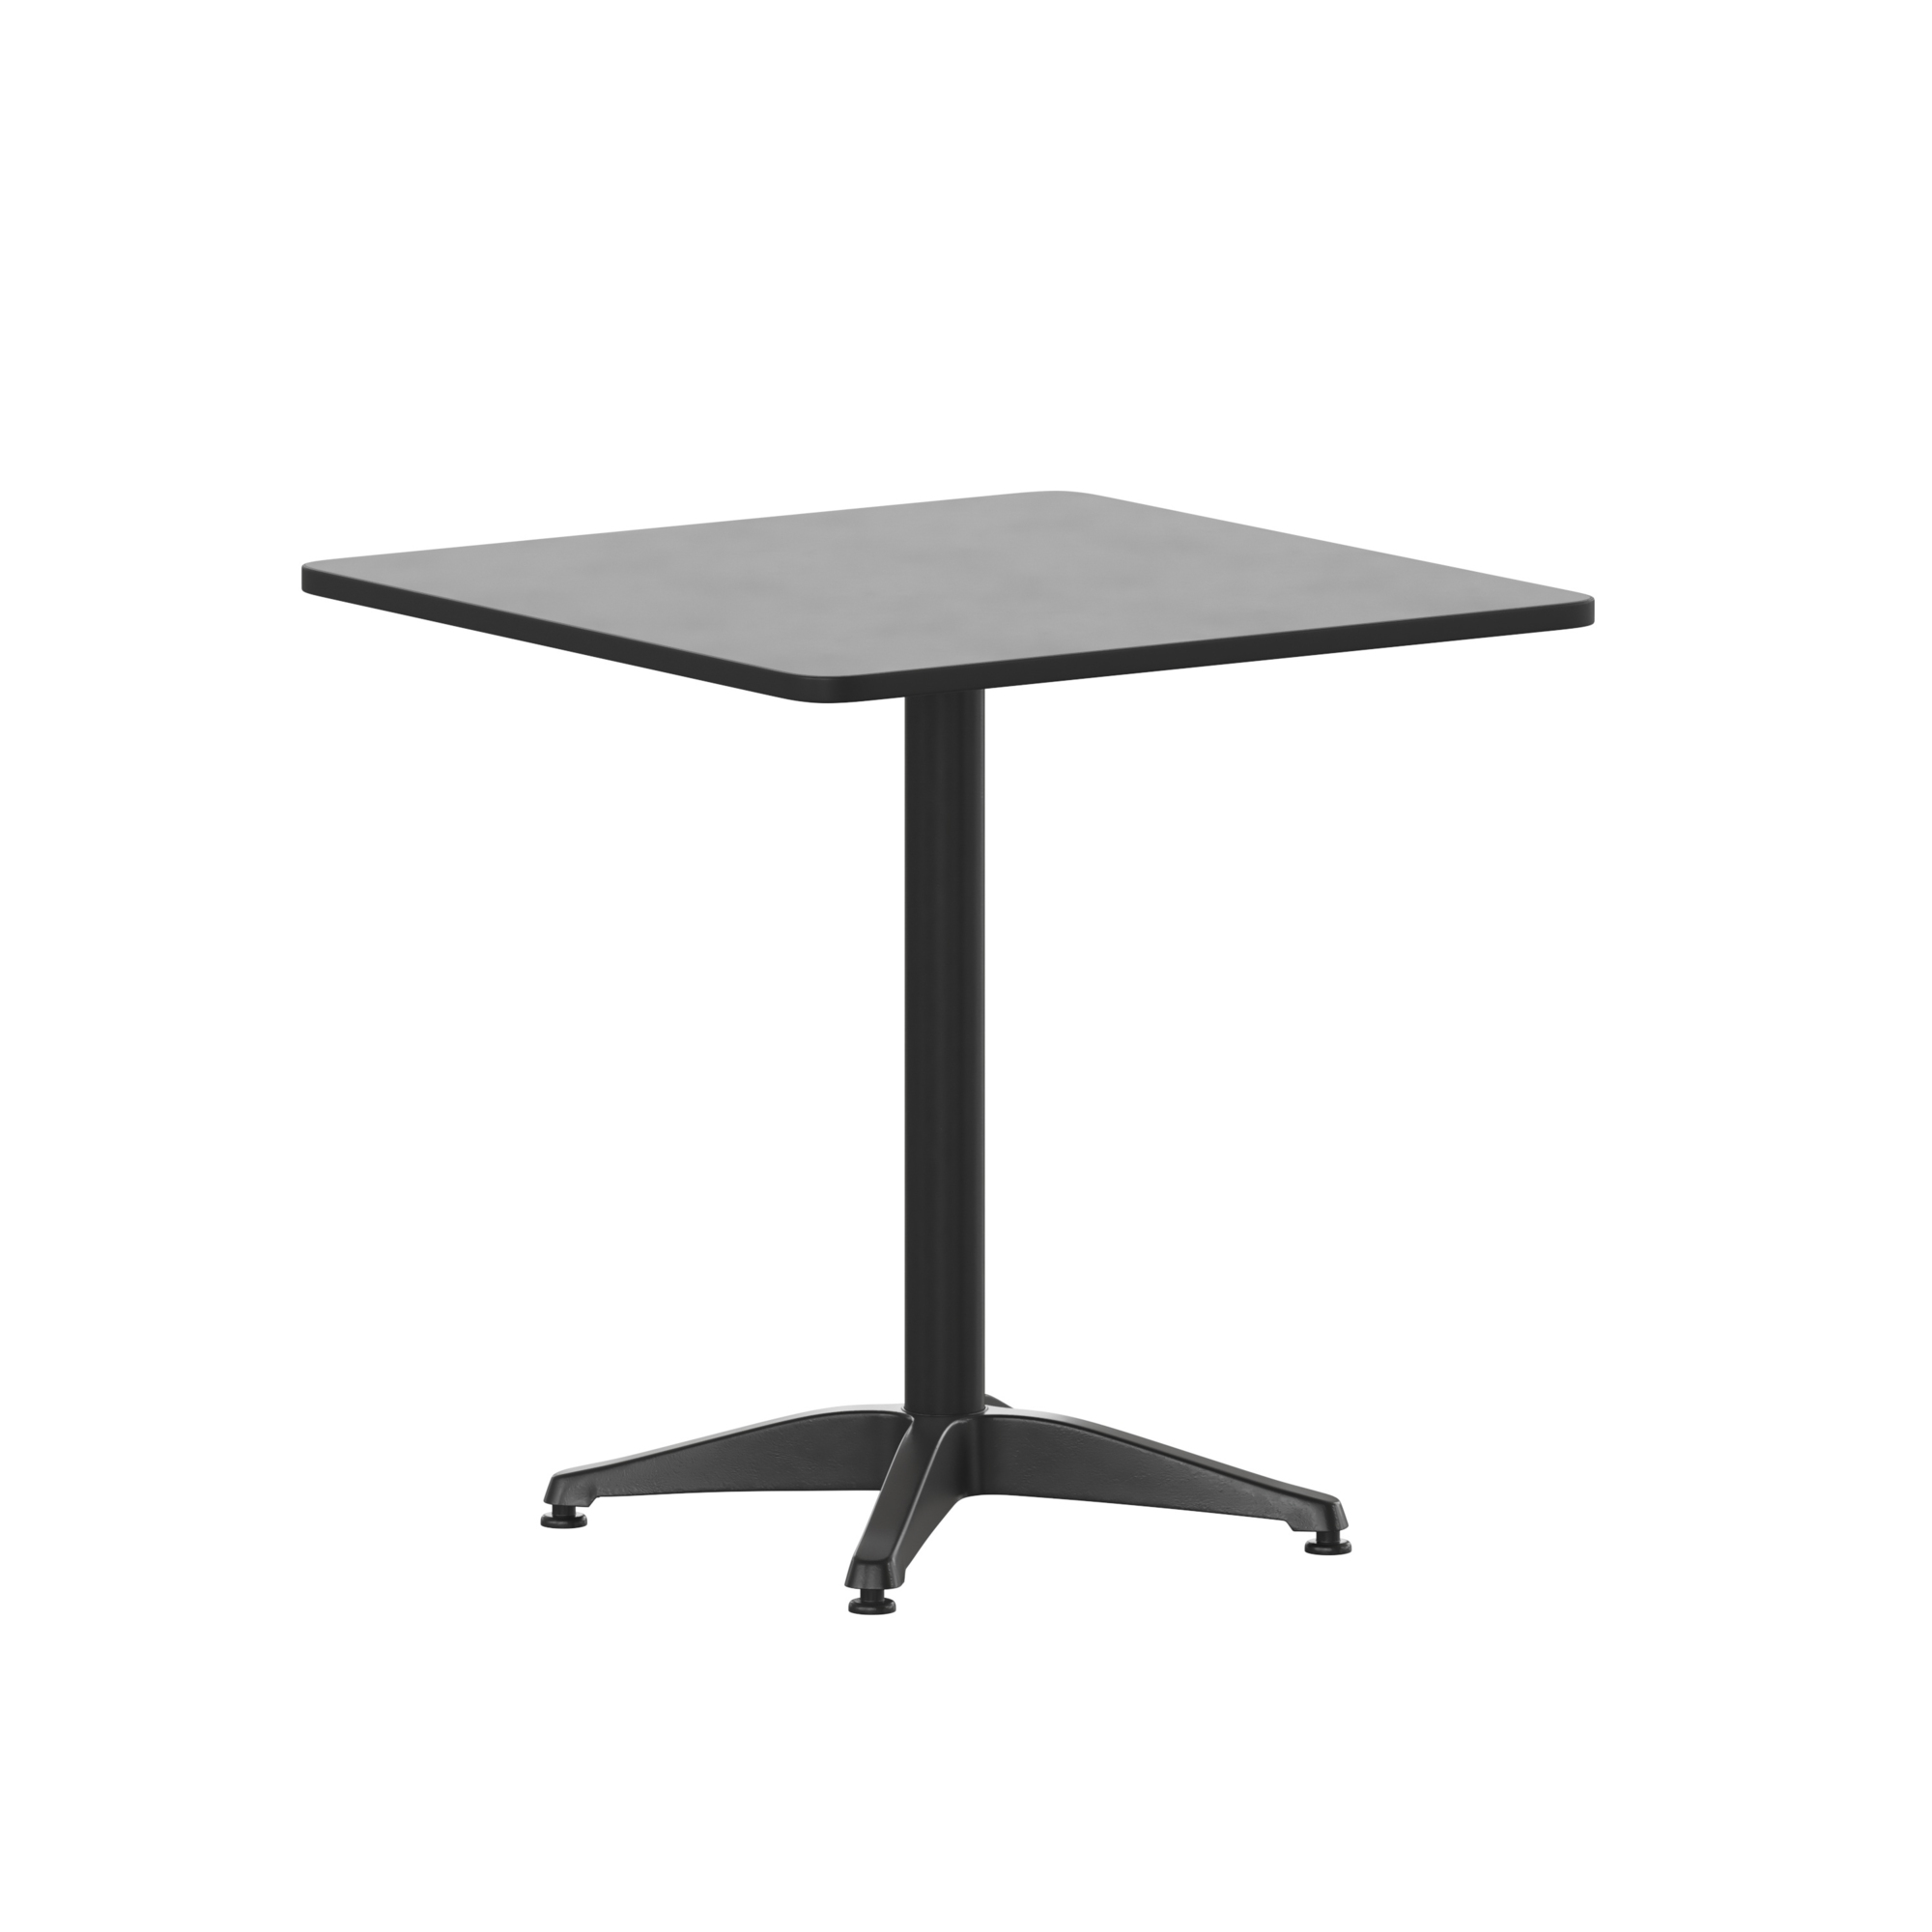 Flash Furniture, 27.5SQ Black Metal Indoor-Outdoor Table w/ Base, Table Shape Square, Primary Color Black, Height 27.5 in, Model TLH0532BK